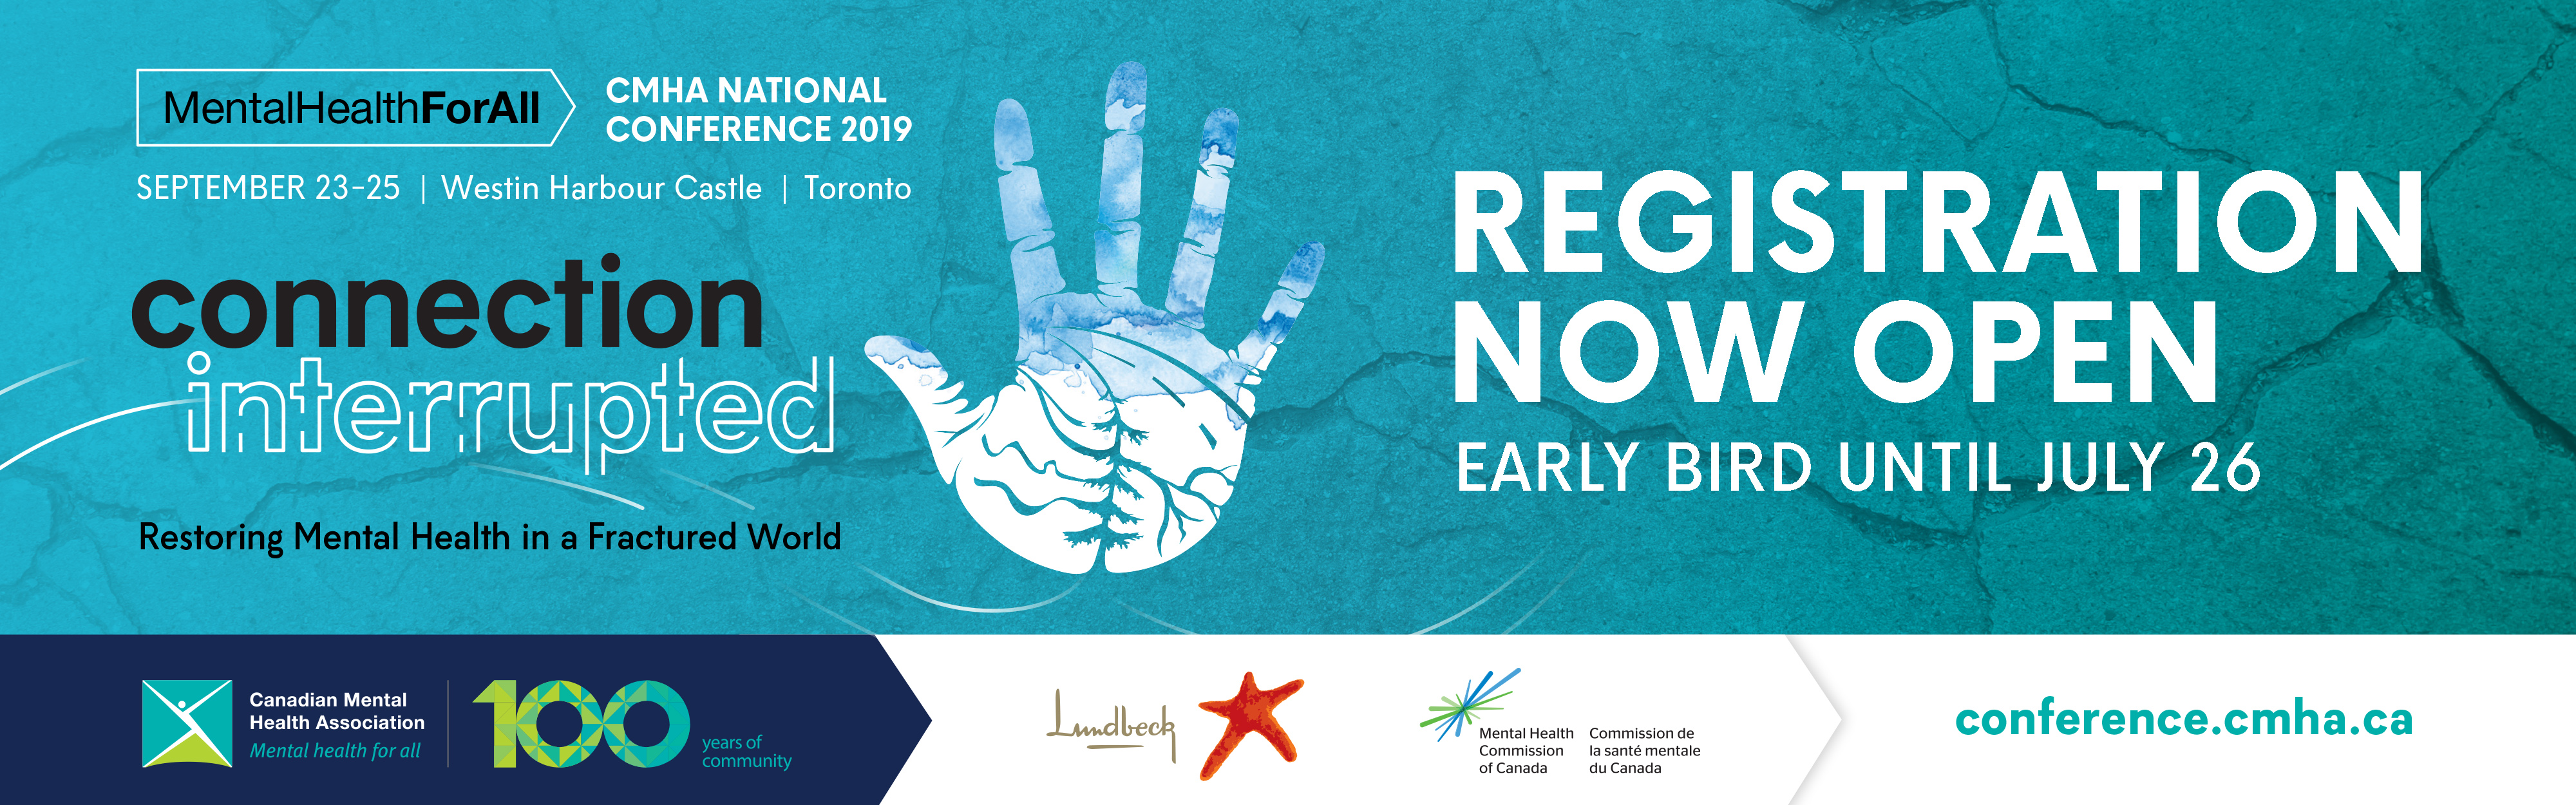 Mental Health for All Conference - early bird until July 26